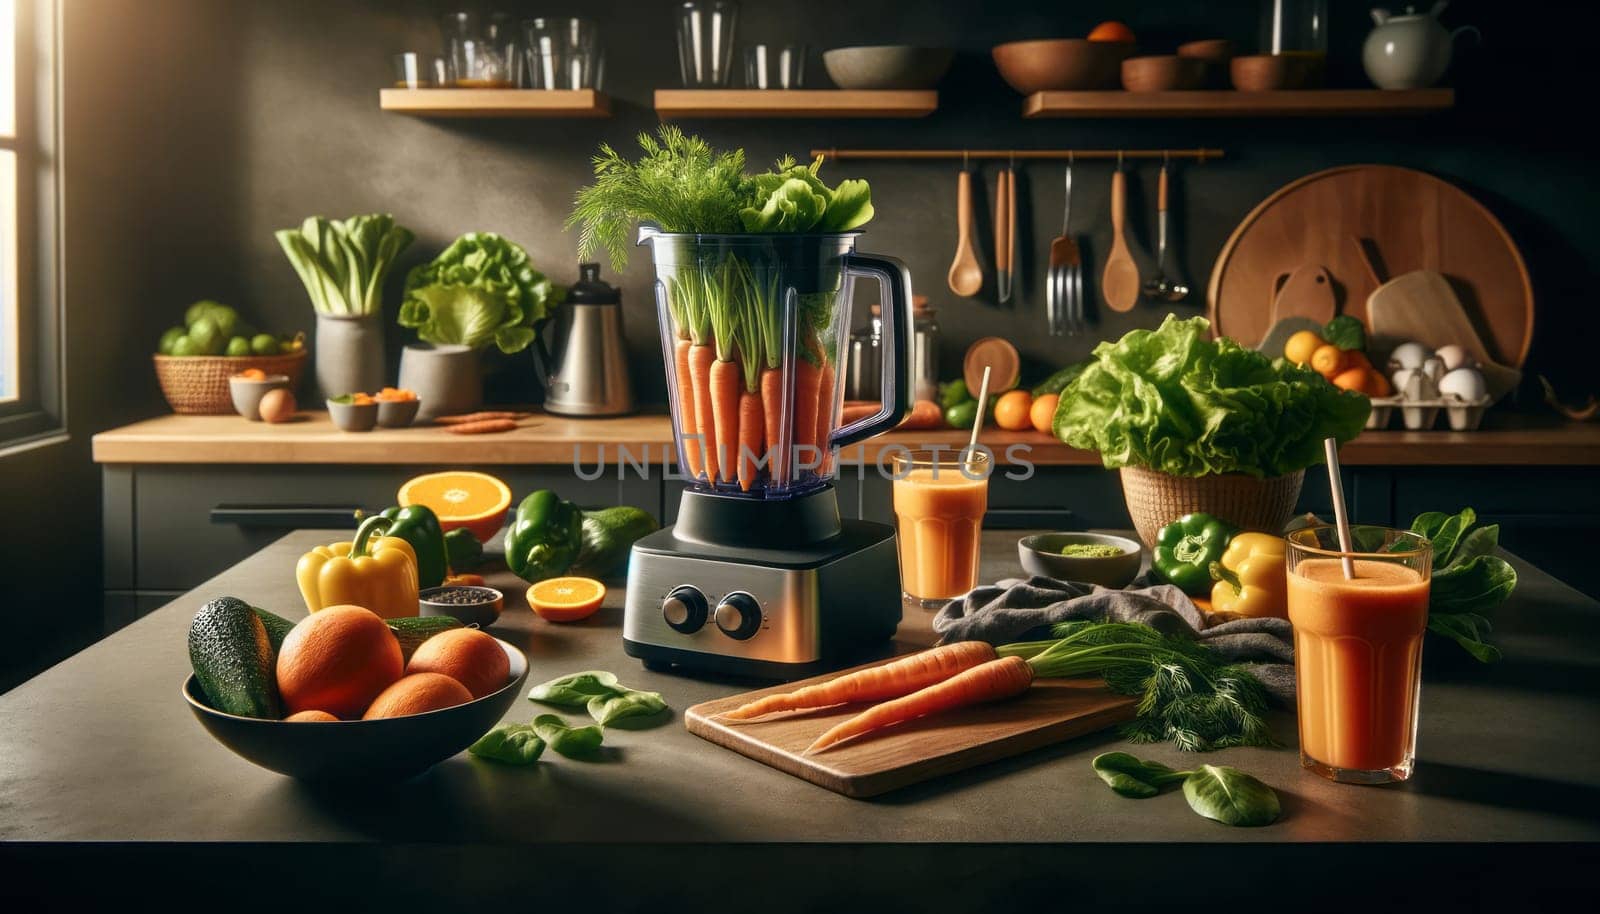 A wide photography of a modern kitchen scene focused on a blender filled with fresh carrots and green leaves, suggesting the preparation of a healthy drink. On the dark kitchen counter, there are whole carrots with tops, glasses of orange juice, and various fresh vegetables like green lettuce, yellow bell peppers, and leafy greens in the background. Nearby, there's a bowl with more oranges. The lighting is soft and warm, creating a homey atmosphere, and the arrangement suggests a focus on healthy, natural foods. The overall scene communicates a sense of wellbeing and healthy lifestyle choices.